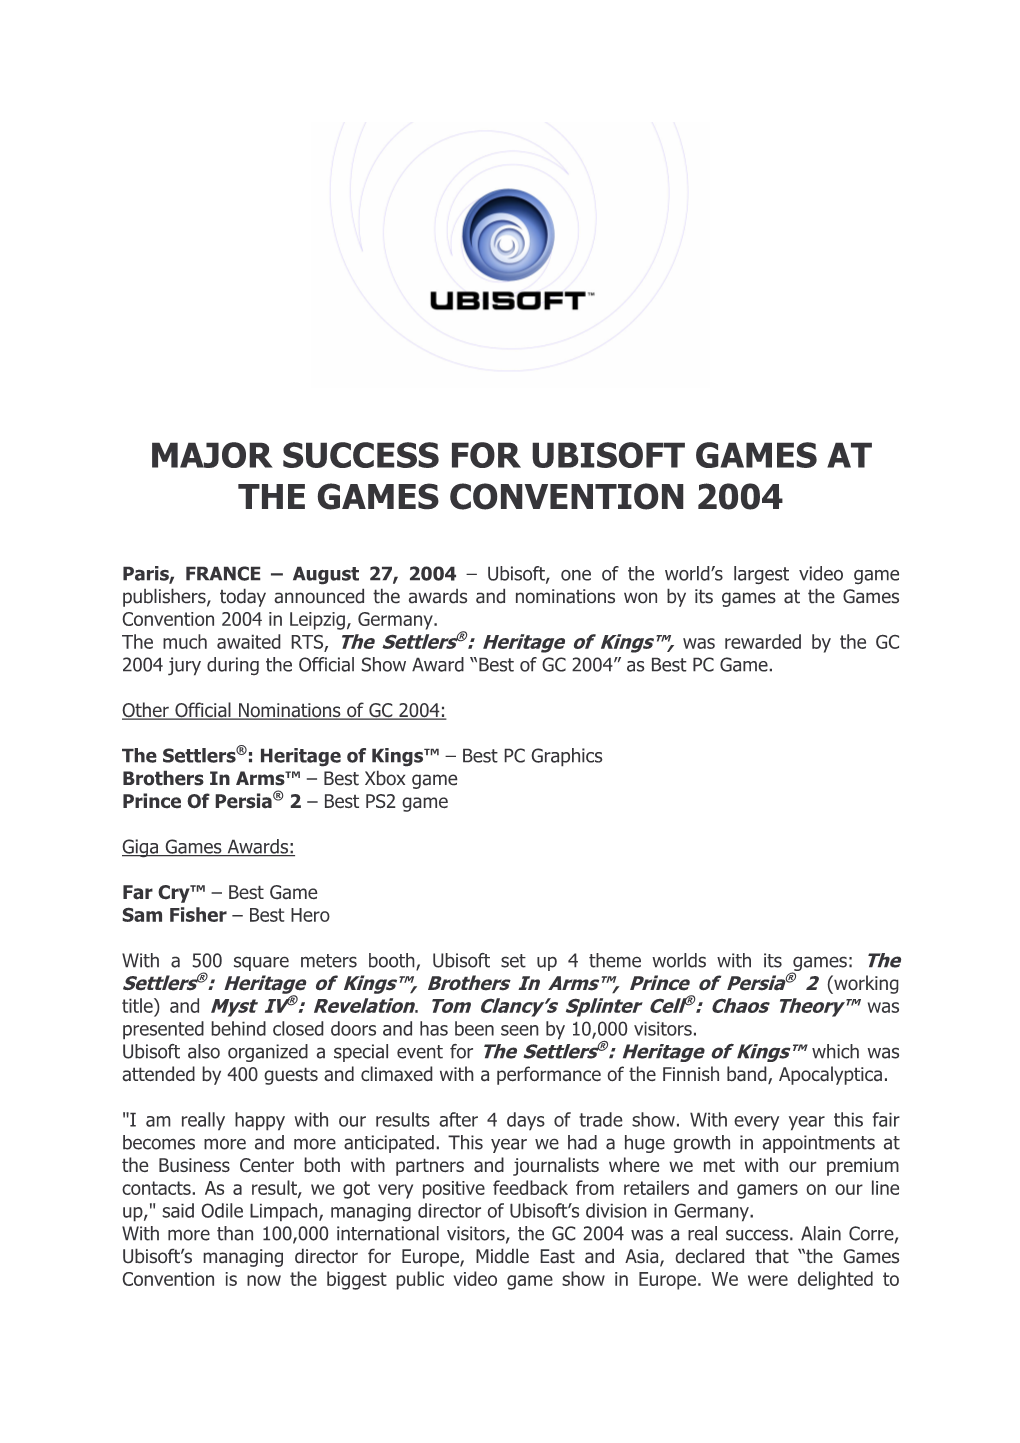 Major Success for Ubisoft Games at the Games Convention 2004